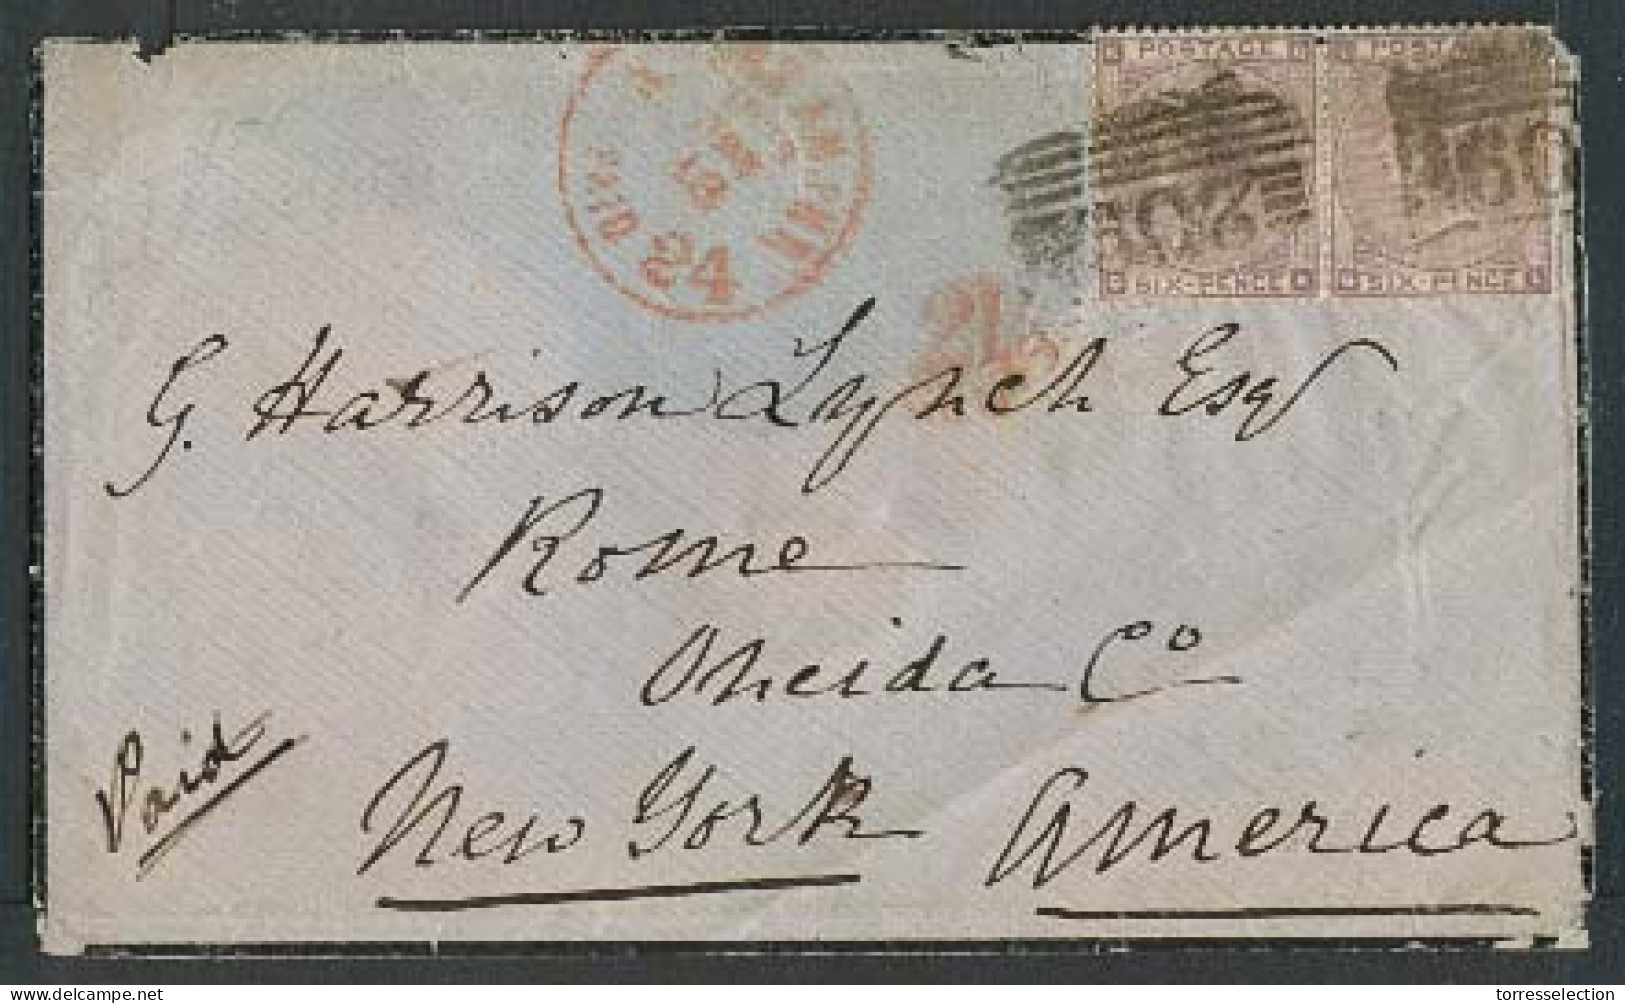 GREAT BRITAIN. 1863 (20 March). Kirkcudbridge / Scotland - USA. Fkd Env 6d Pair Small Colored Letters / 20q Grill. - ...-1840 Voorlopers